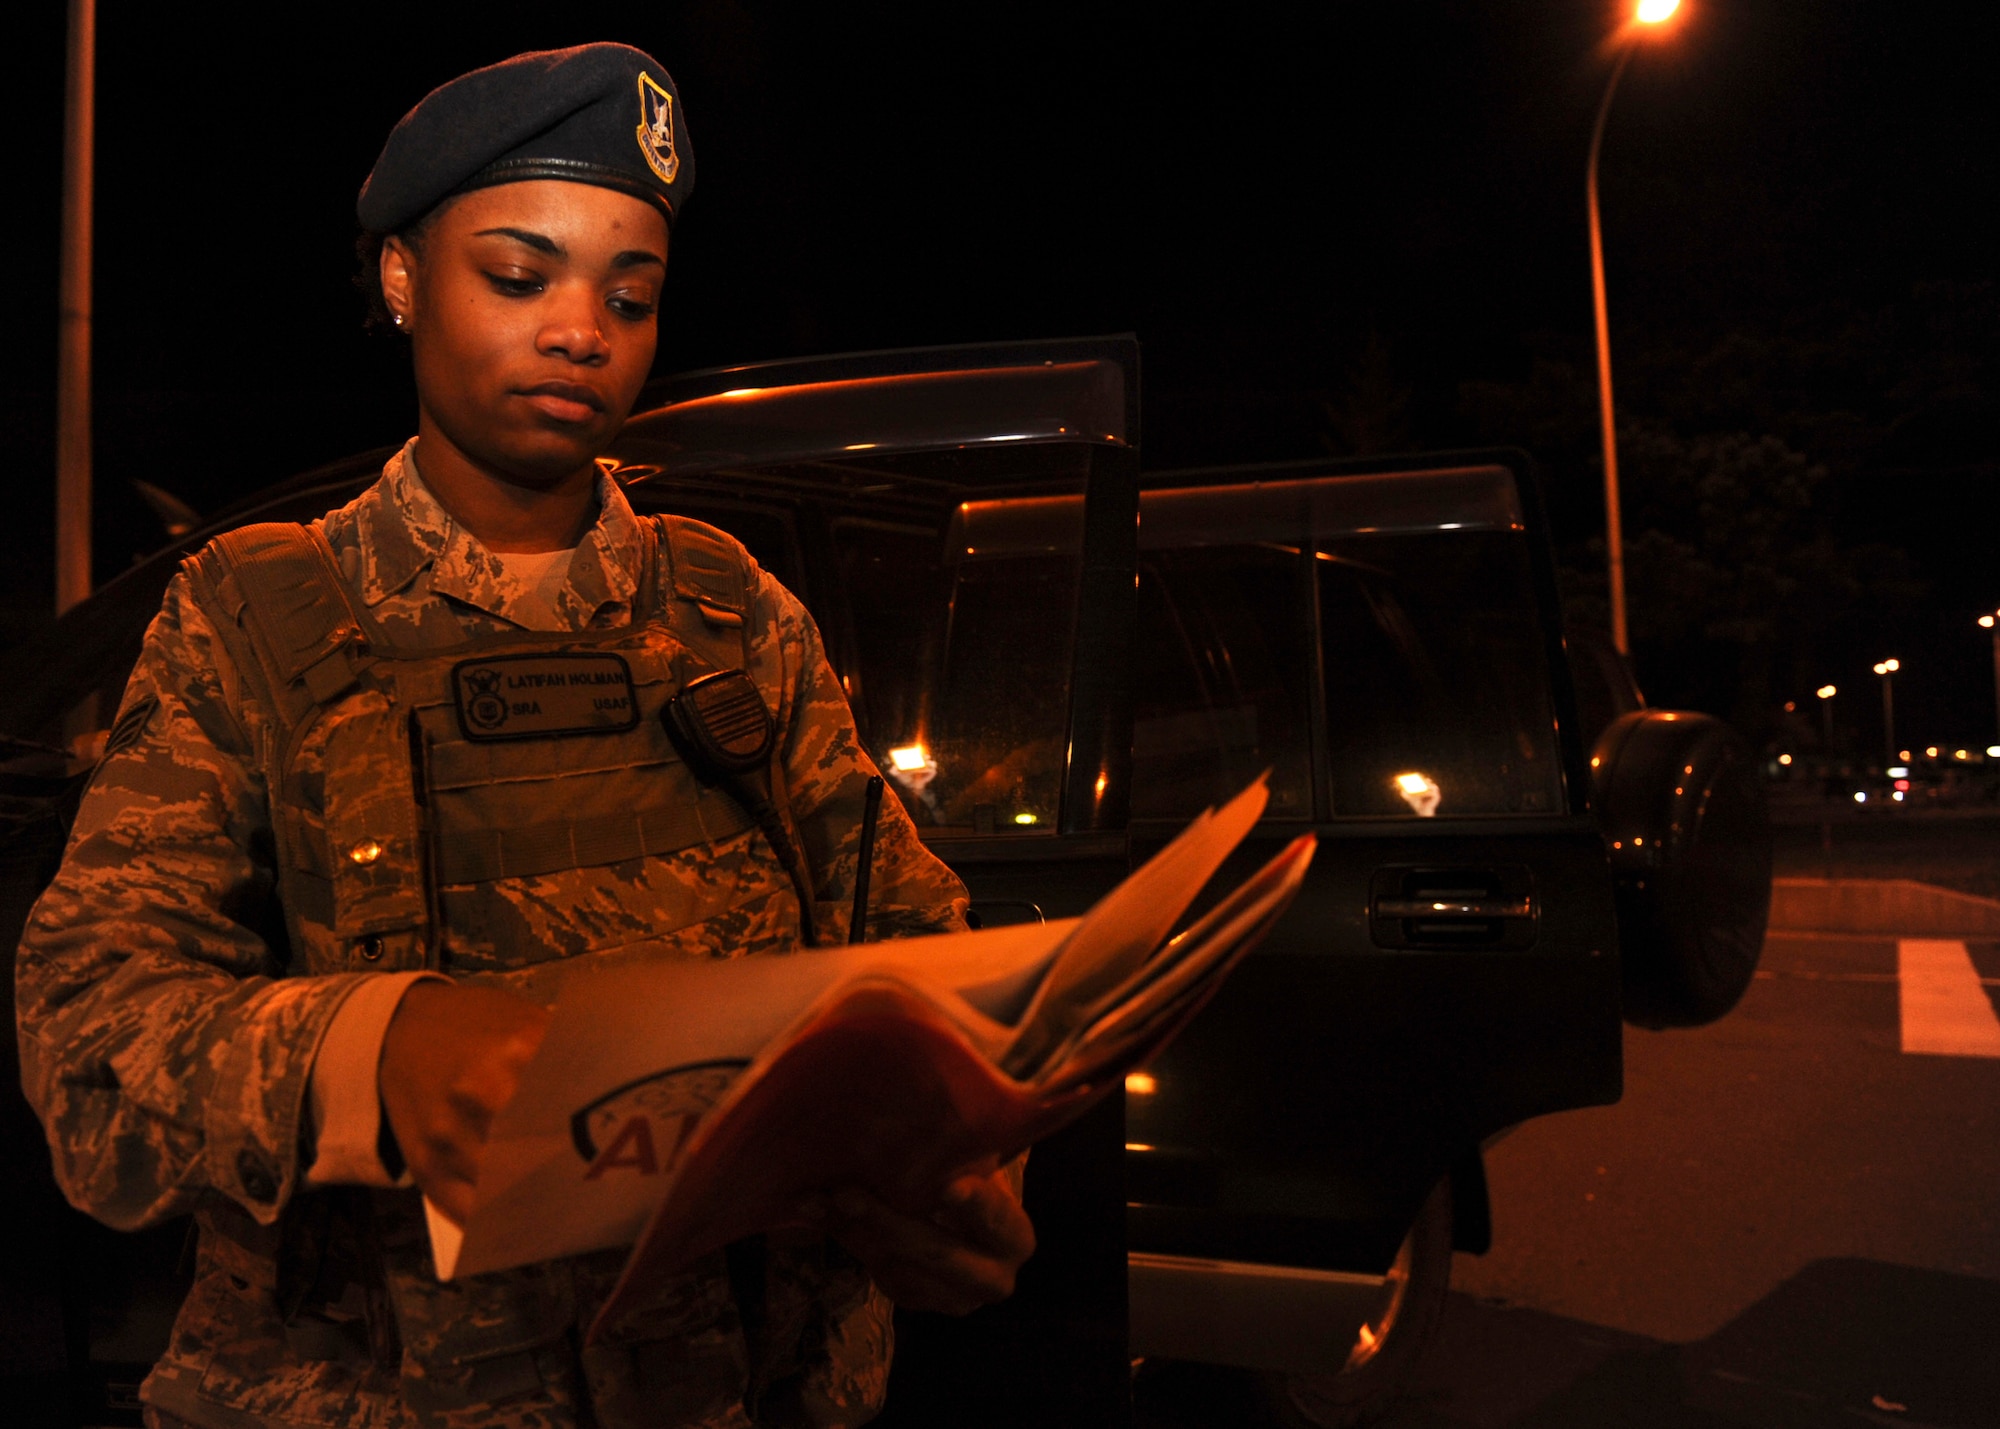 Senior Airman Latifah Holman, 35th Security Forces Squadron alarm monitor, reviews vehicle documents during a random vehicle check at Misawa Air Base, Japan, Nov. 20, 2014. As a member of the SFS, Holman is responsible for enusring the safety of Misawa personnel and equipment. Her superior performance, outstanding work ethic, and overall good conduct and discipline earned her the title of Wild Weasel of the Week. (U.S. Air Force photo/Staff Sgt. Alyssa C. Wallace)
